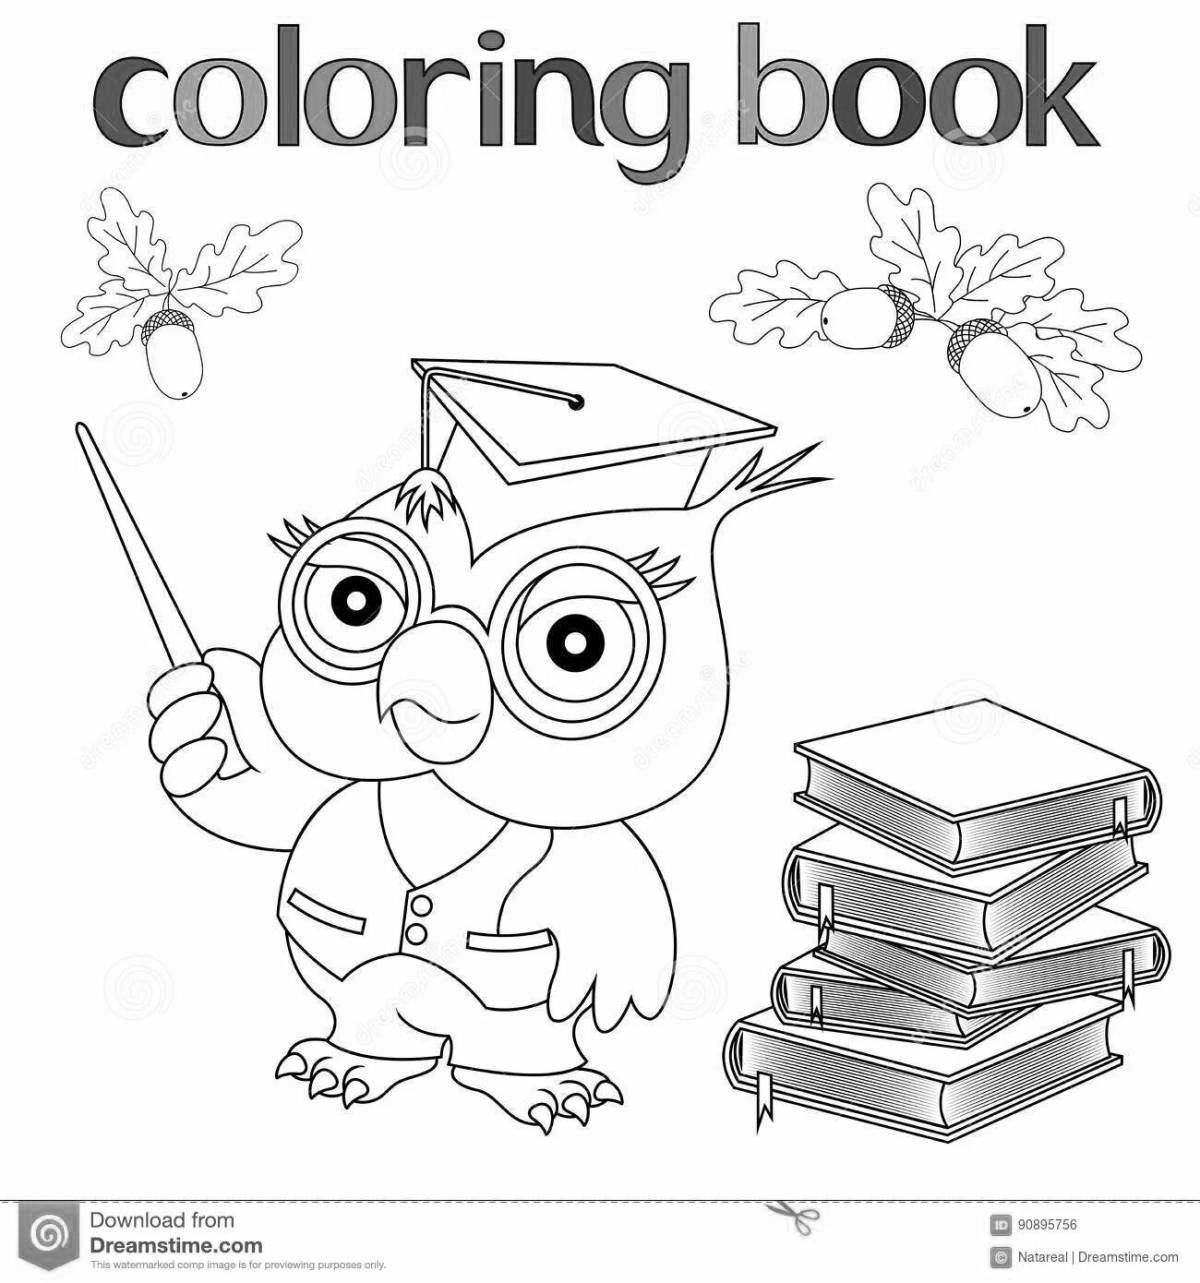 Coloring book clever owl